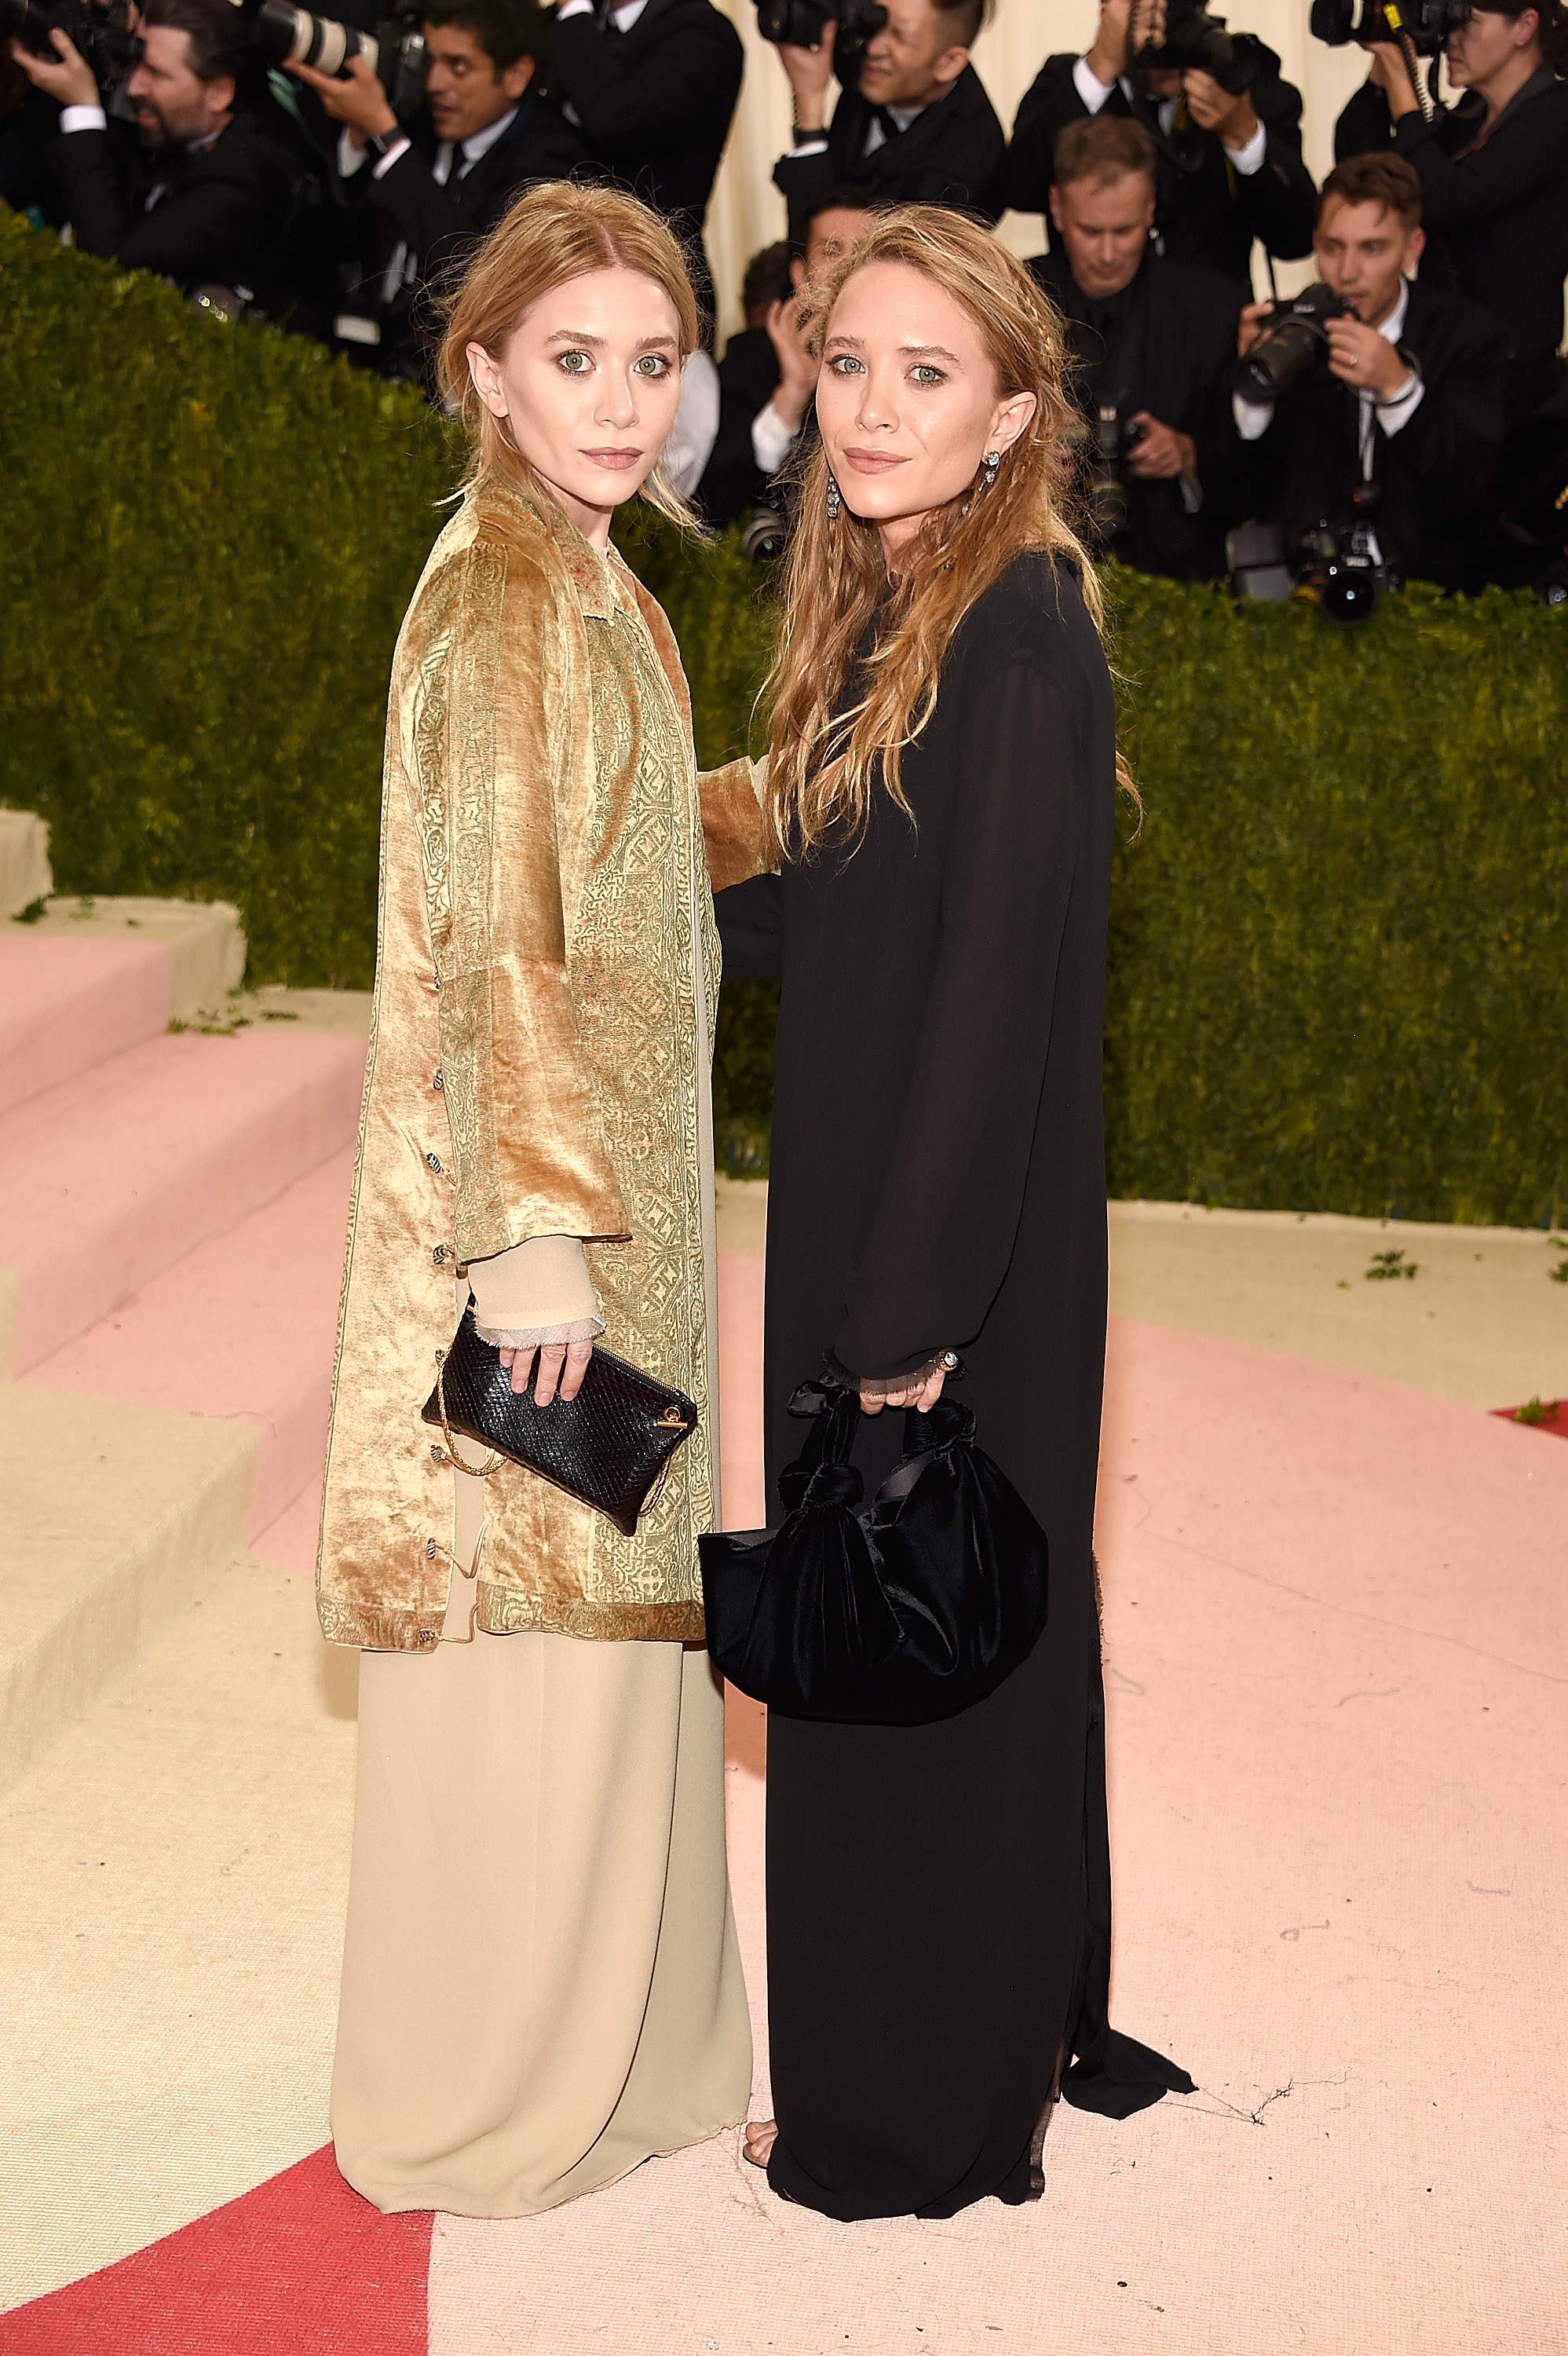 The Olsen Twins attend  Manus x Machina: Fashion In An Age Of Technology  Costume Institute Gala at Metropolitan Museum of Art on May 2, 2016 in New York City.